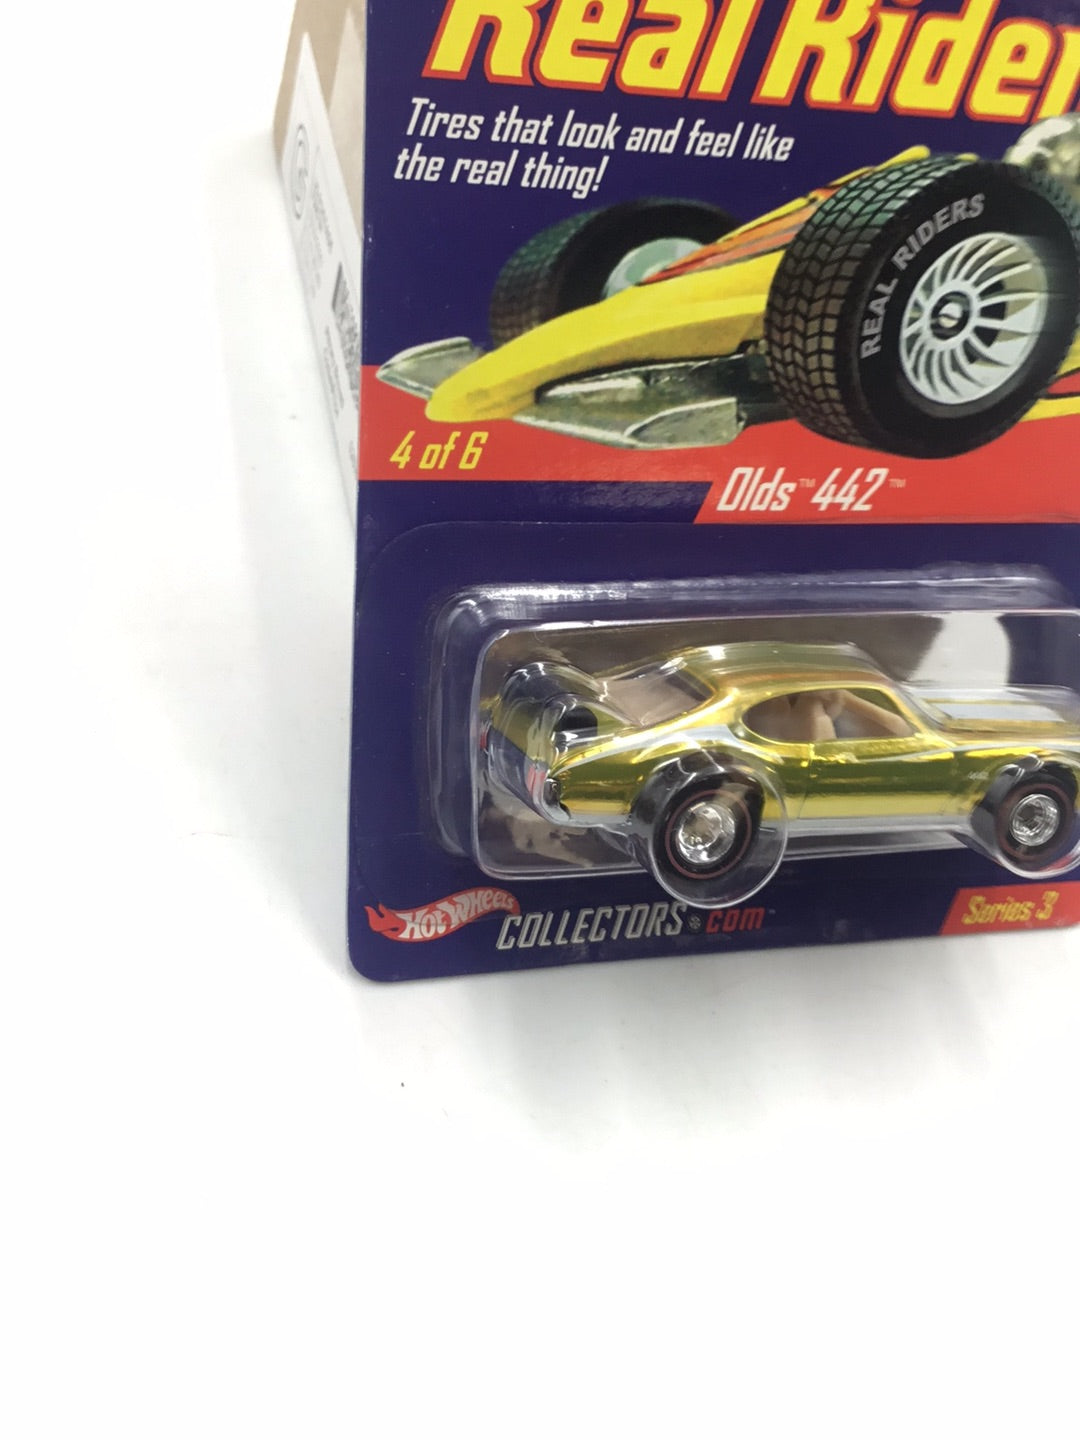 Hot wheels Real Riders Olds 442 #4 2913/10500 with protector